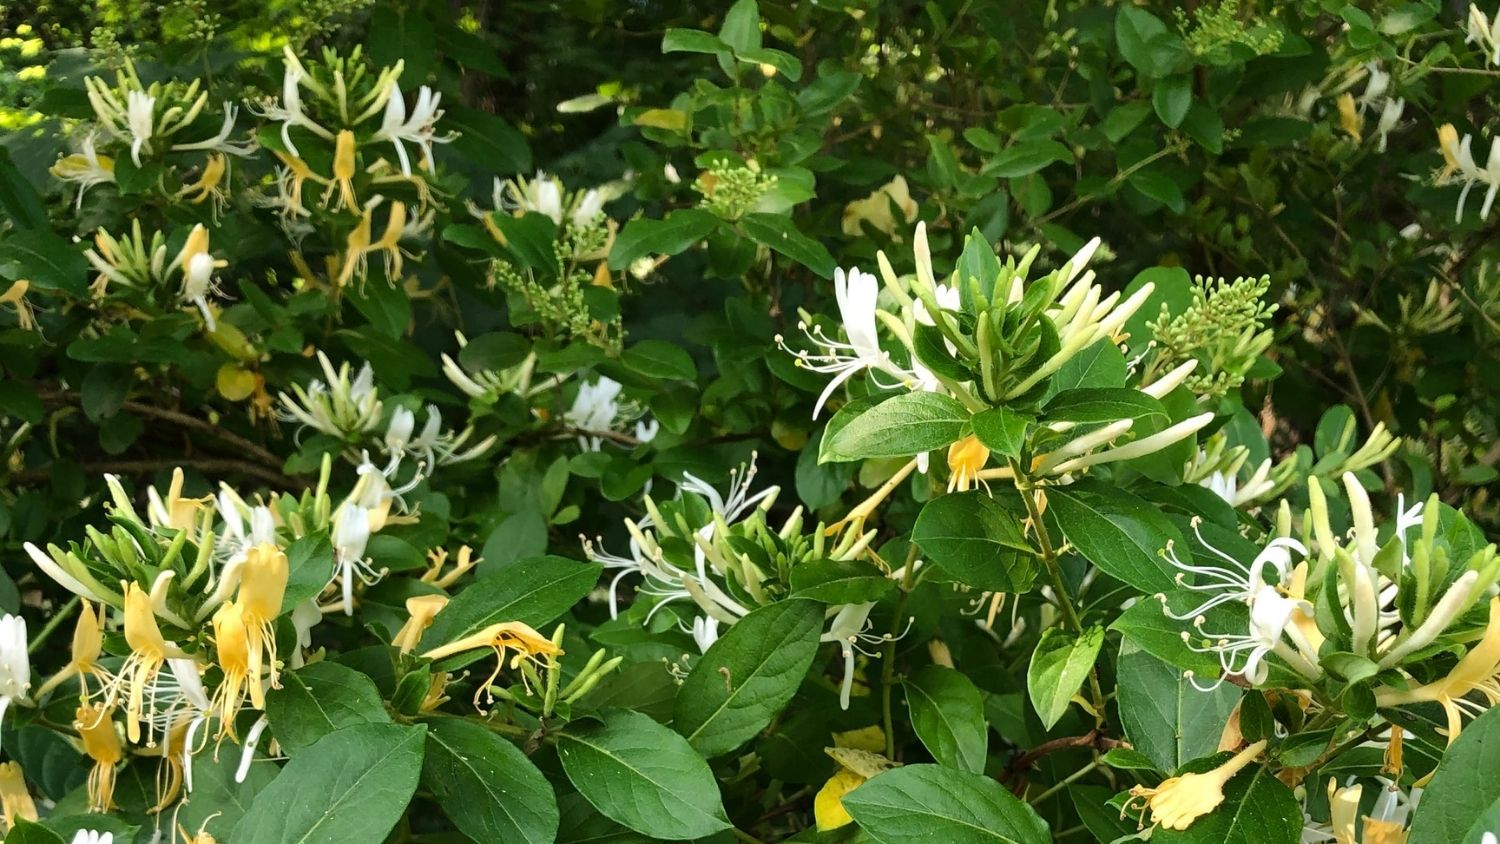 Japanese honeysuckle - Which North Carolina invasive species are you? - College of Natural Resources News NC State University